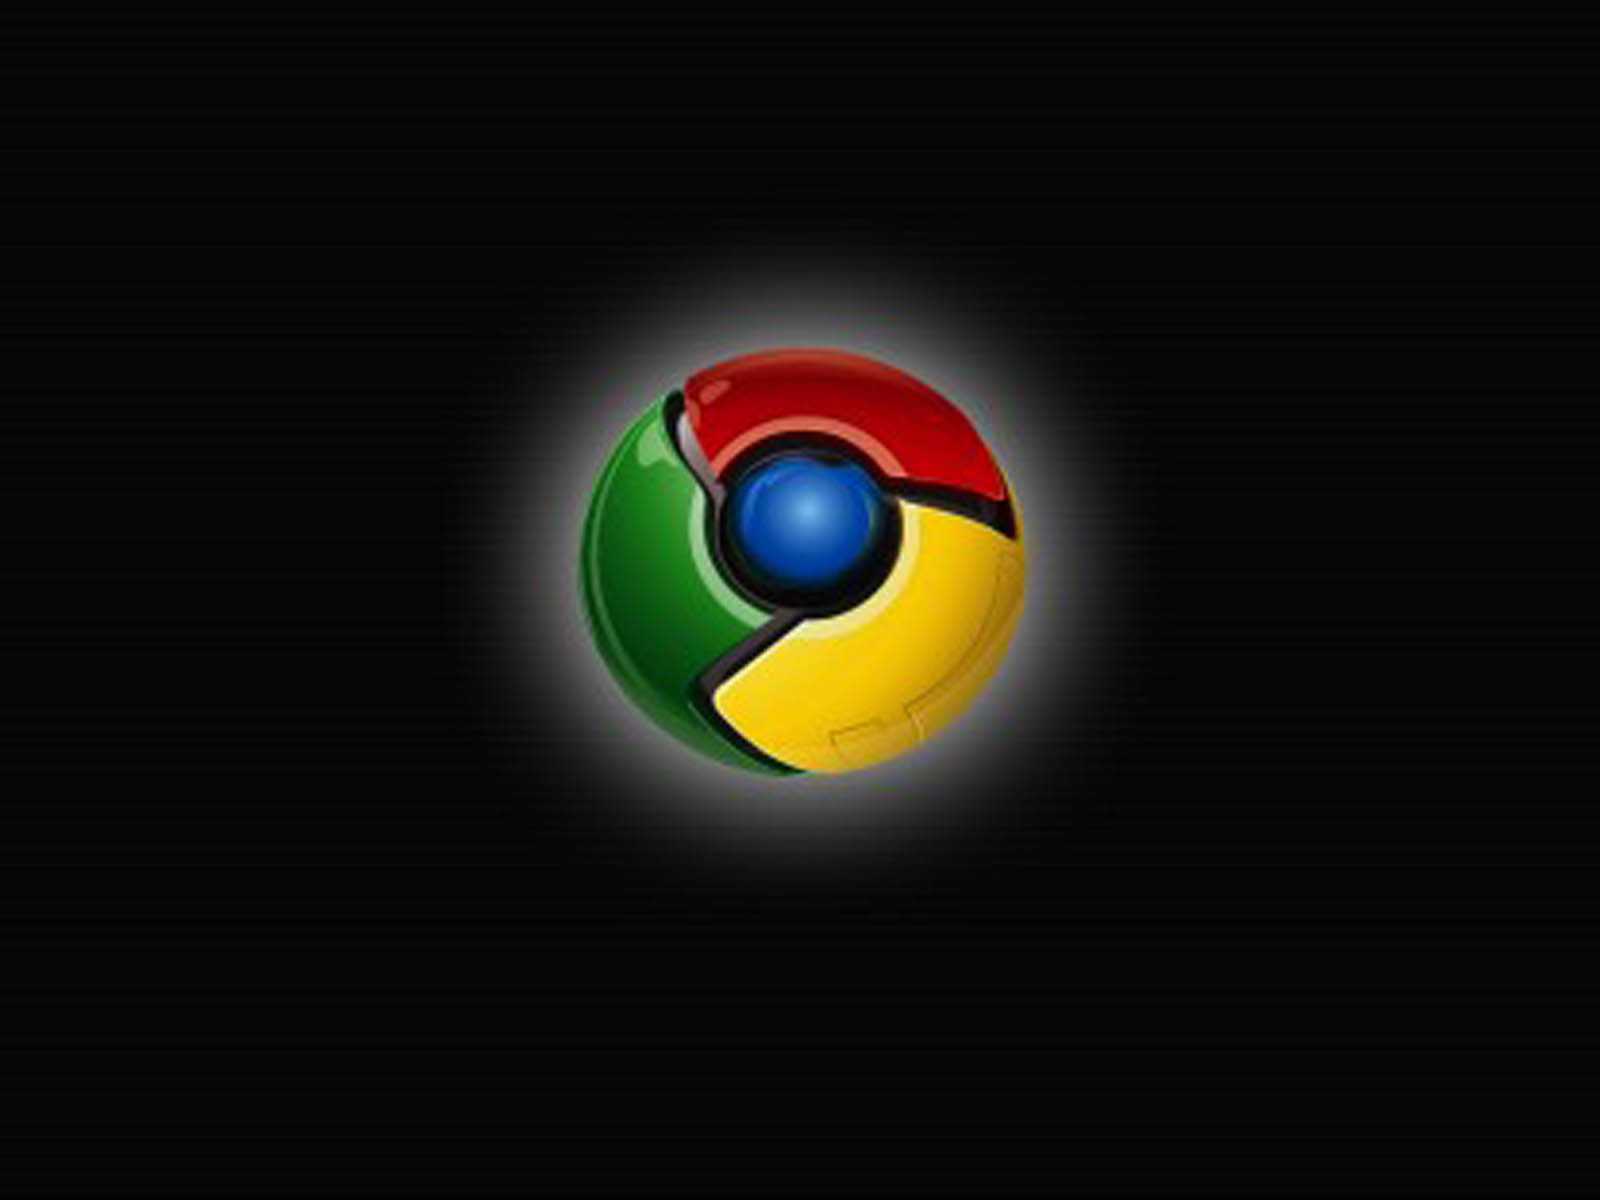 Chrome Wallpaper Image Photos Pictures And Background For